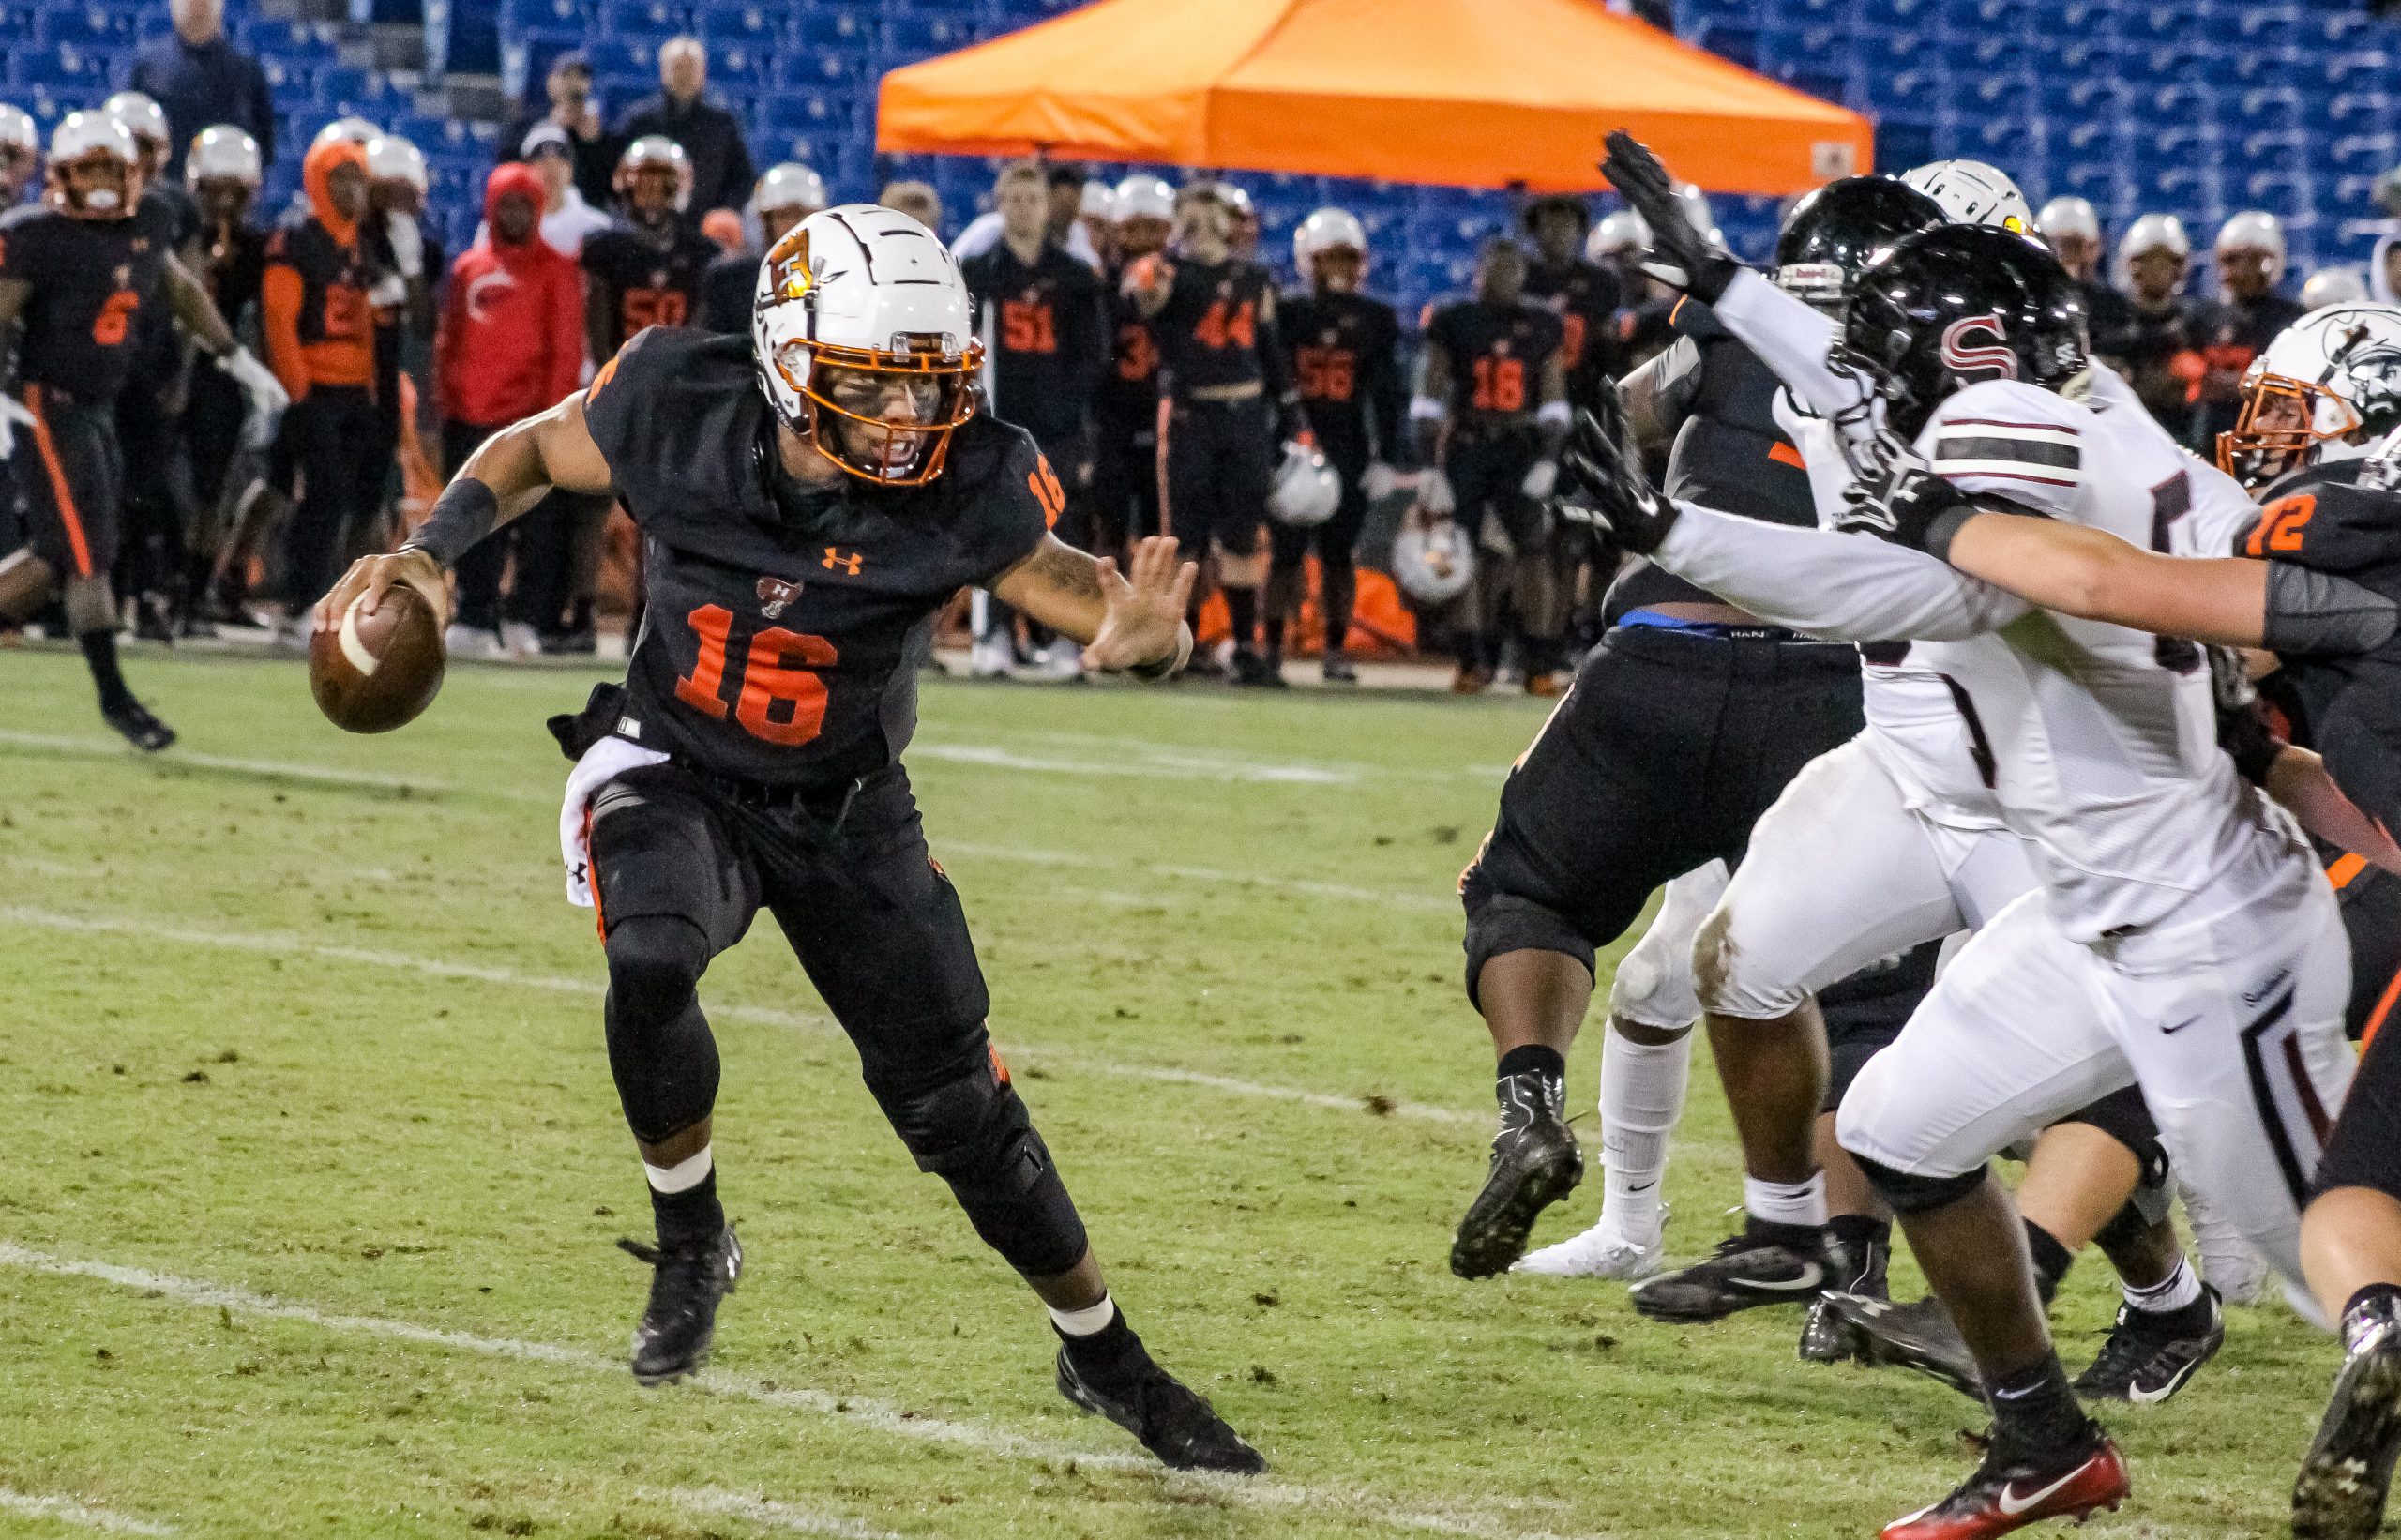 Hoover advances to 7A quarterfinals with win over Sparkman